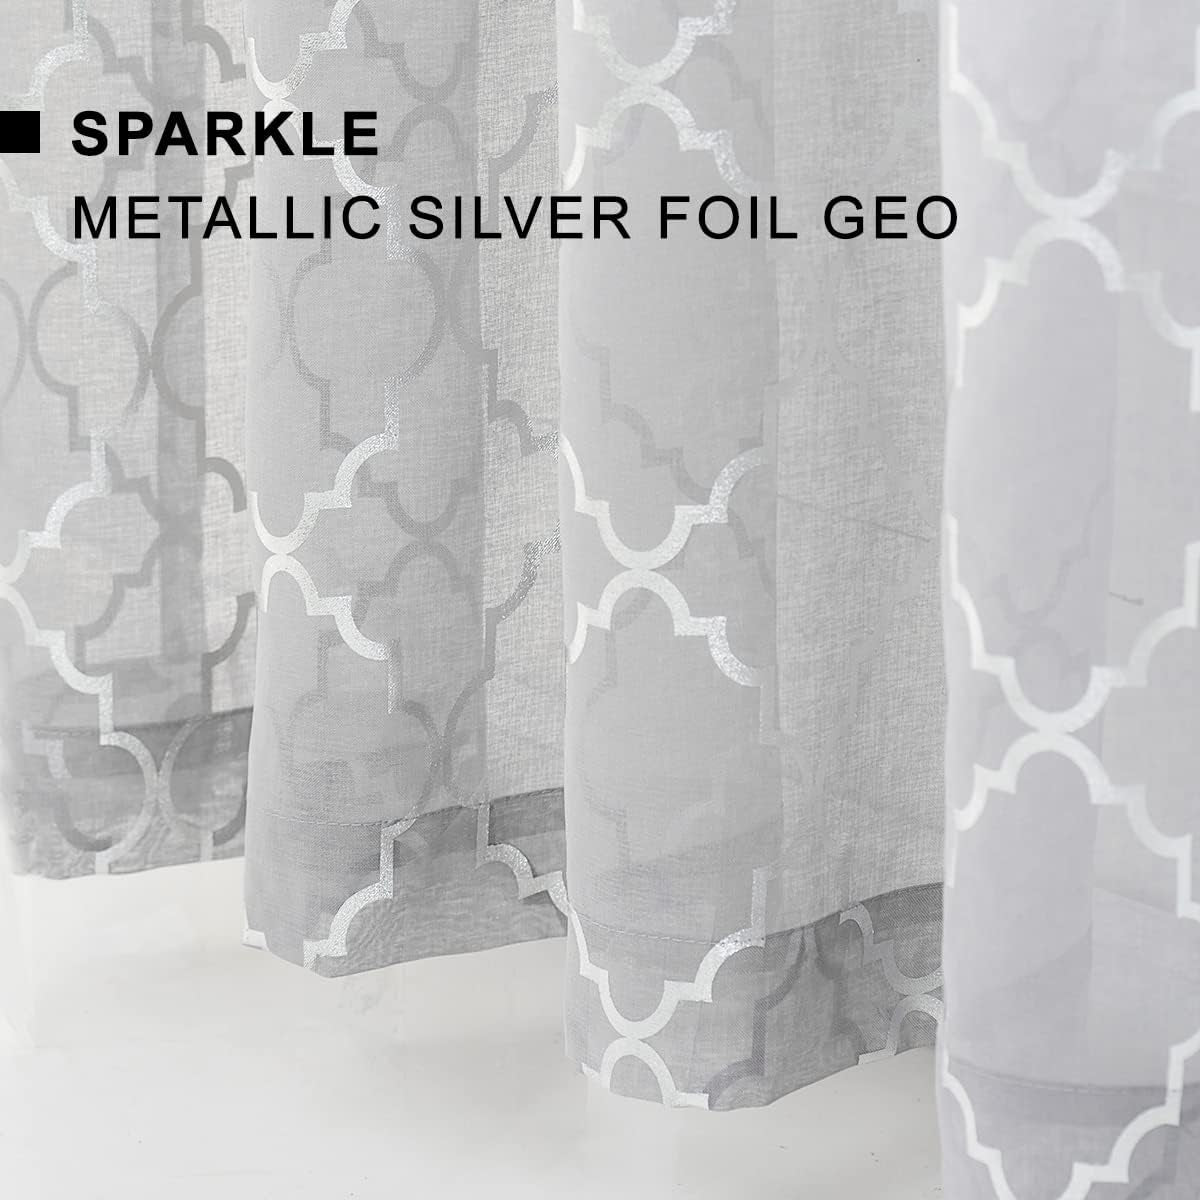 Kotile Silver Grey Sheer Curtains 96 Inch - Metallic Silver Foil Moroccan Tile Printed Rod Pocket Privacy Light Filtering Curtains for Living Room, 52 X 96 Inches, 2 Panels, Grey and Silver  Kotile Textile   